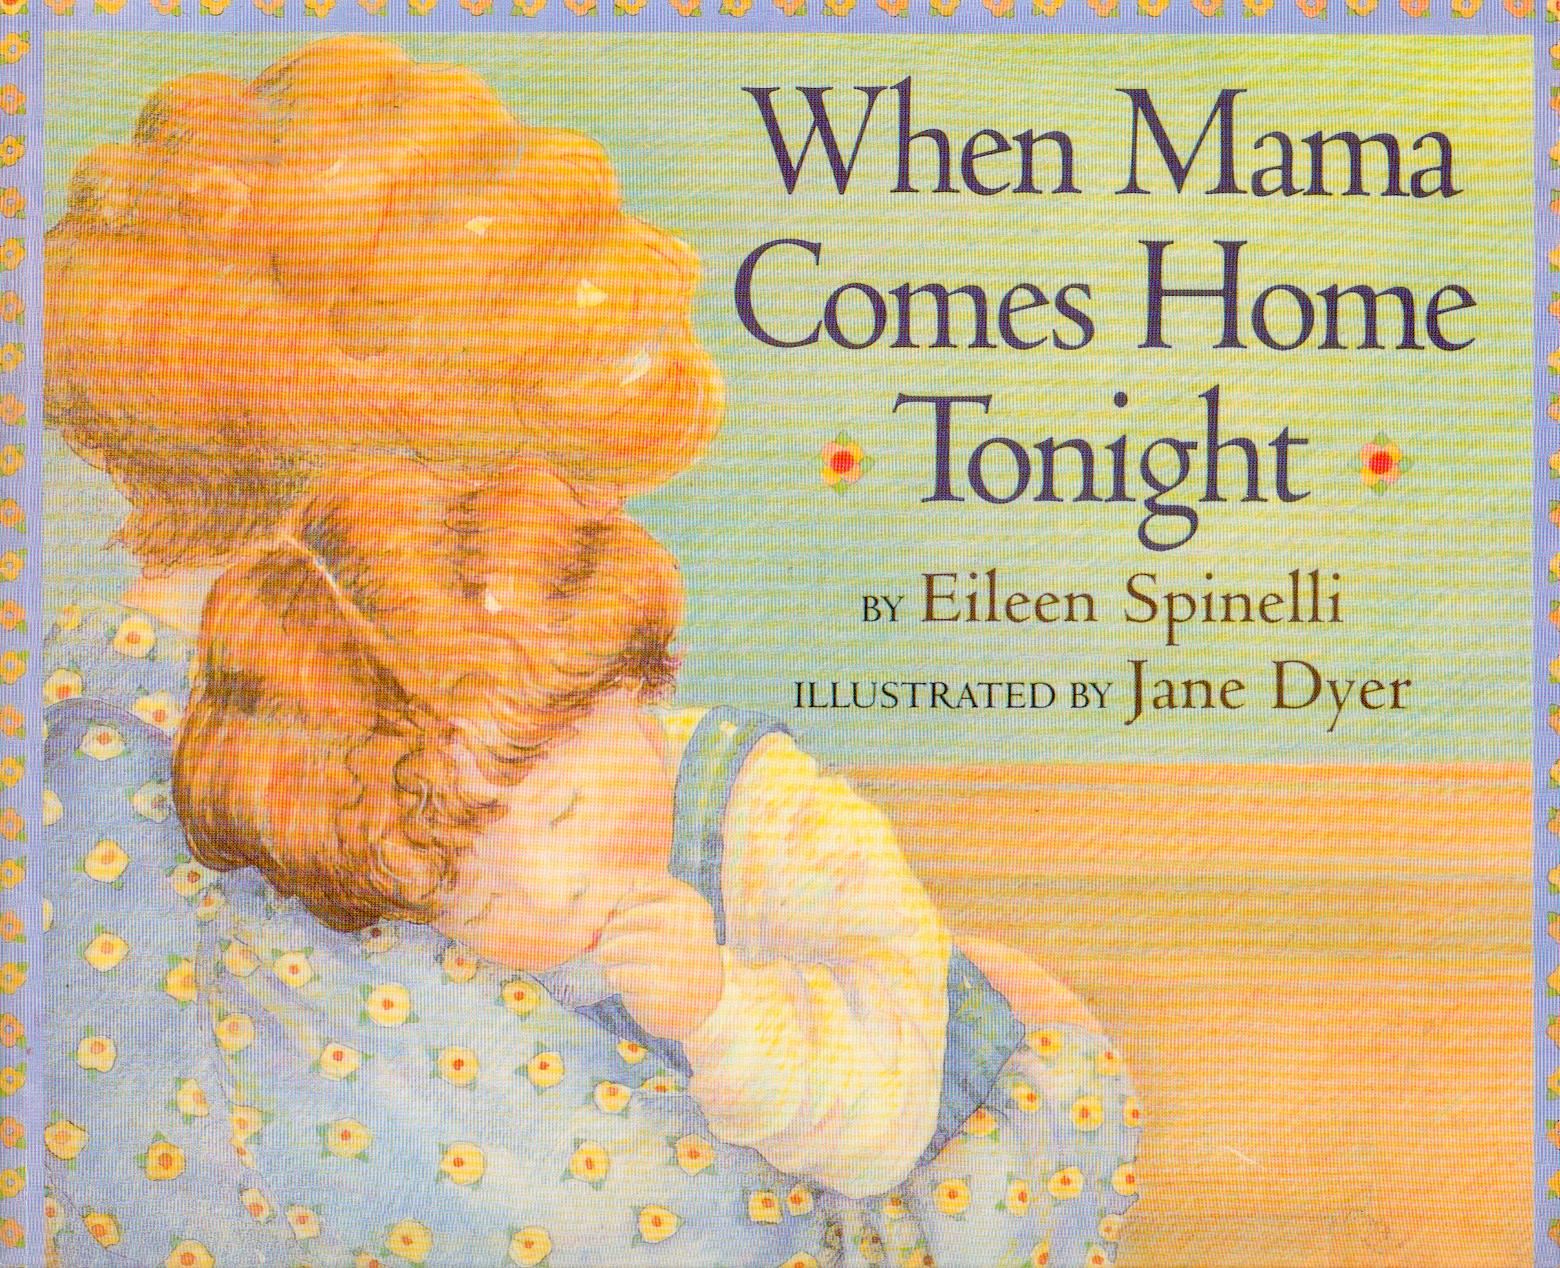 When mama comes home tonight Eileen Spinelli; Jane Dyer (ill.)